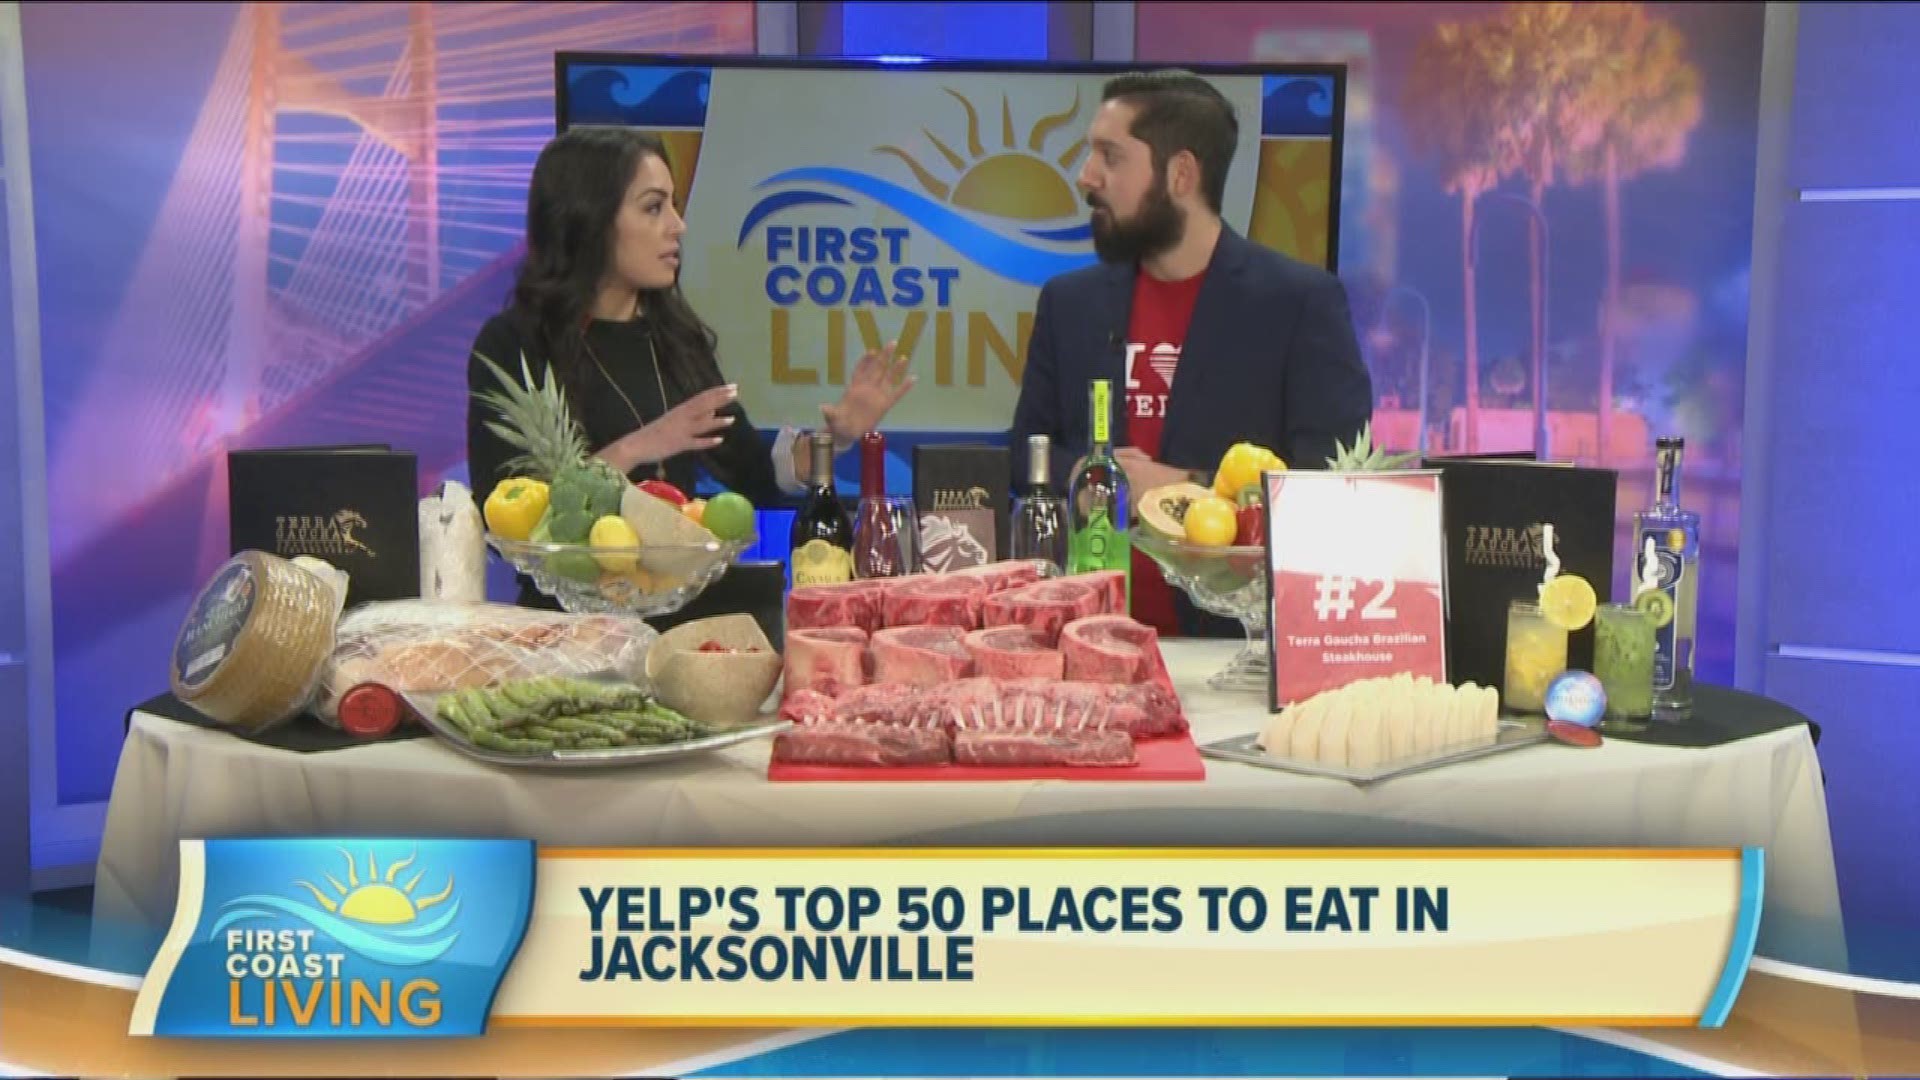 Learn more about Jacksonville's Top 50 places to eat (FCL March 6th